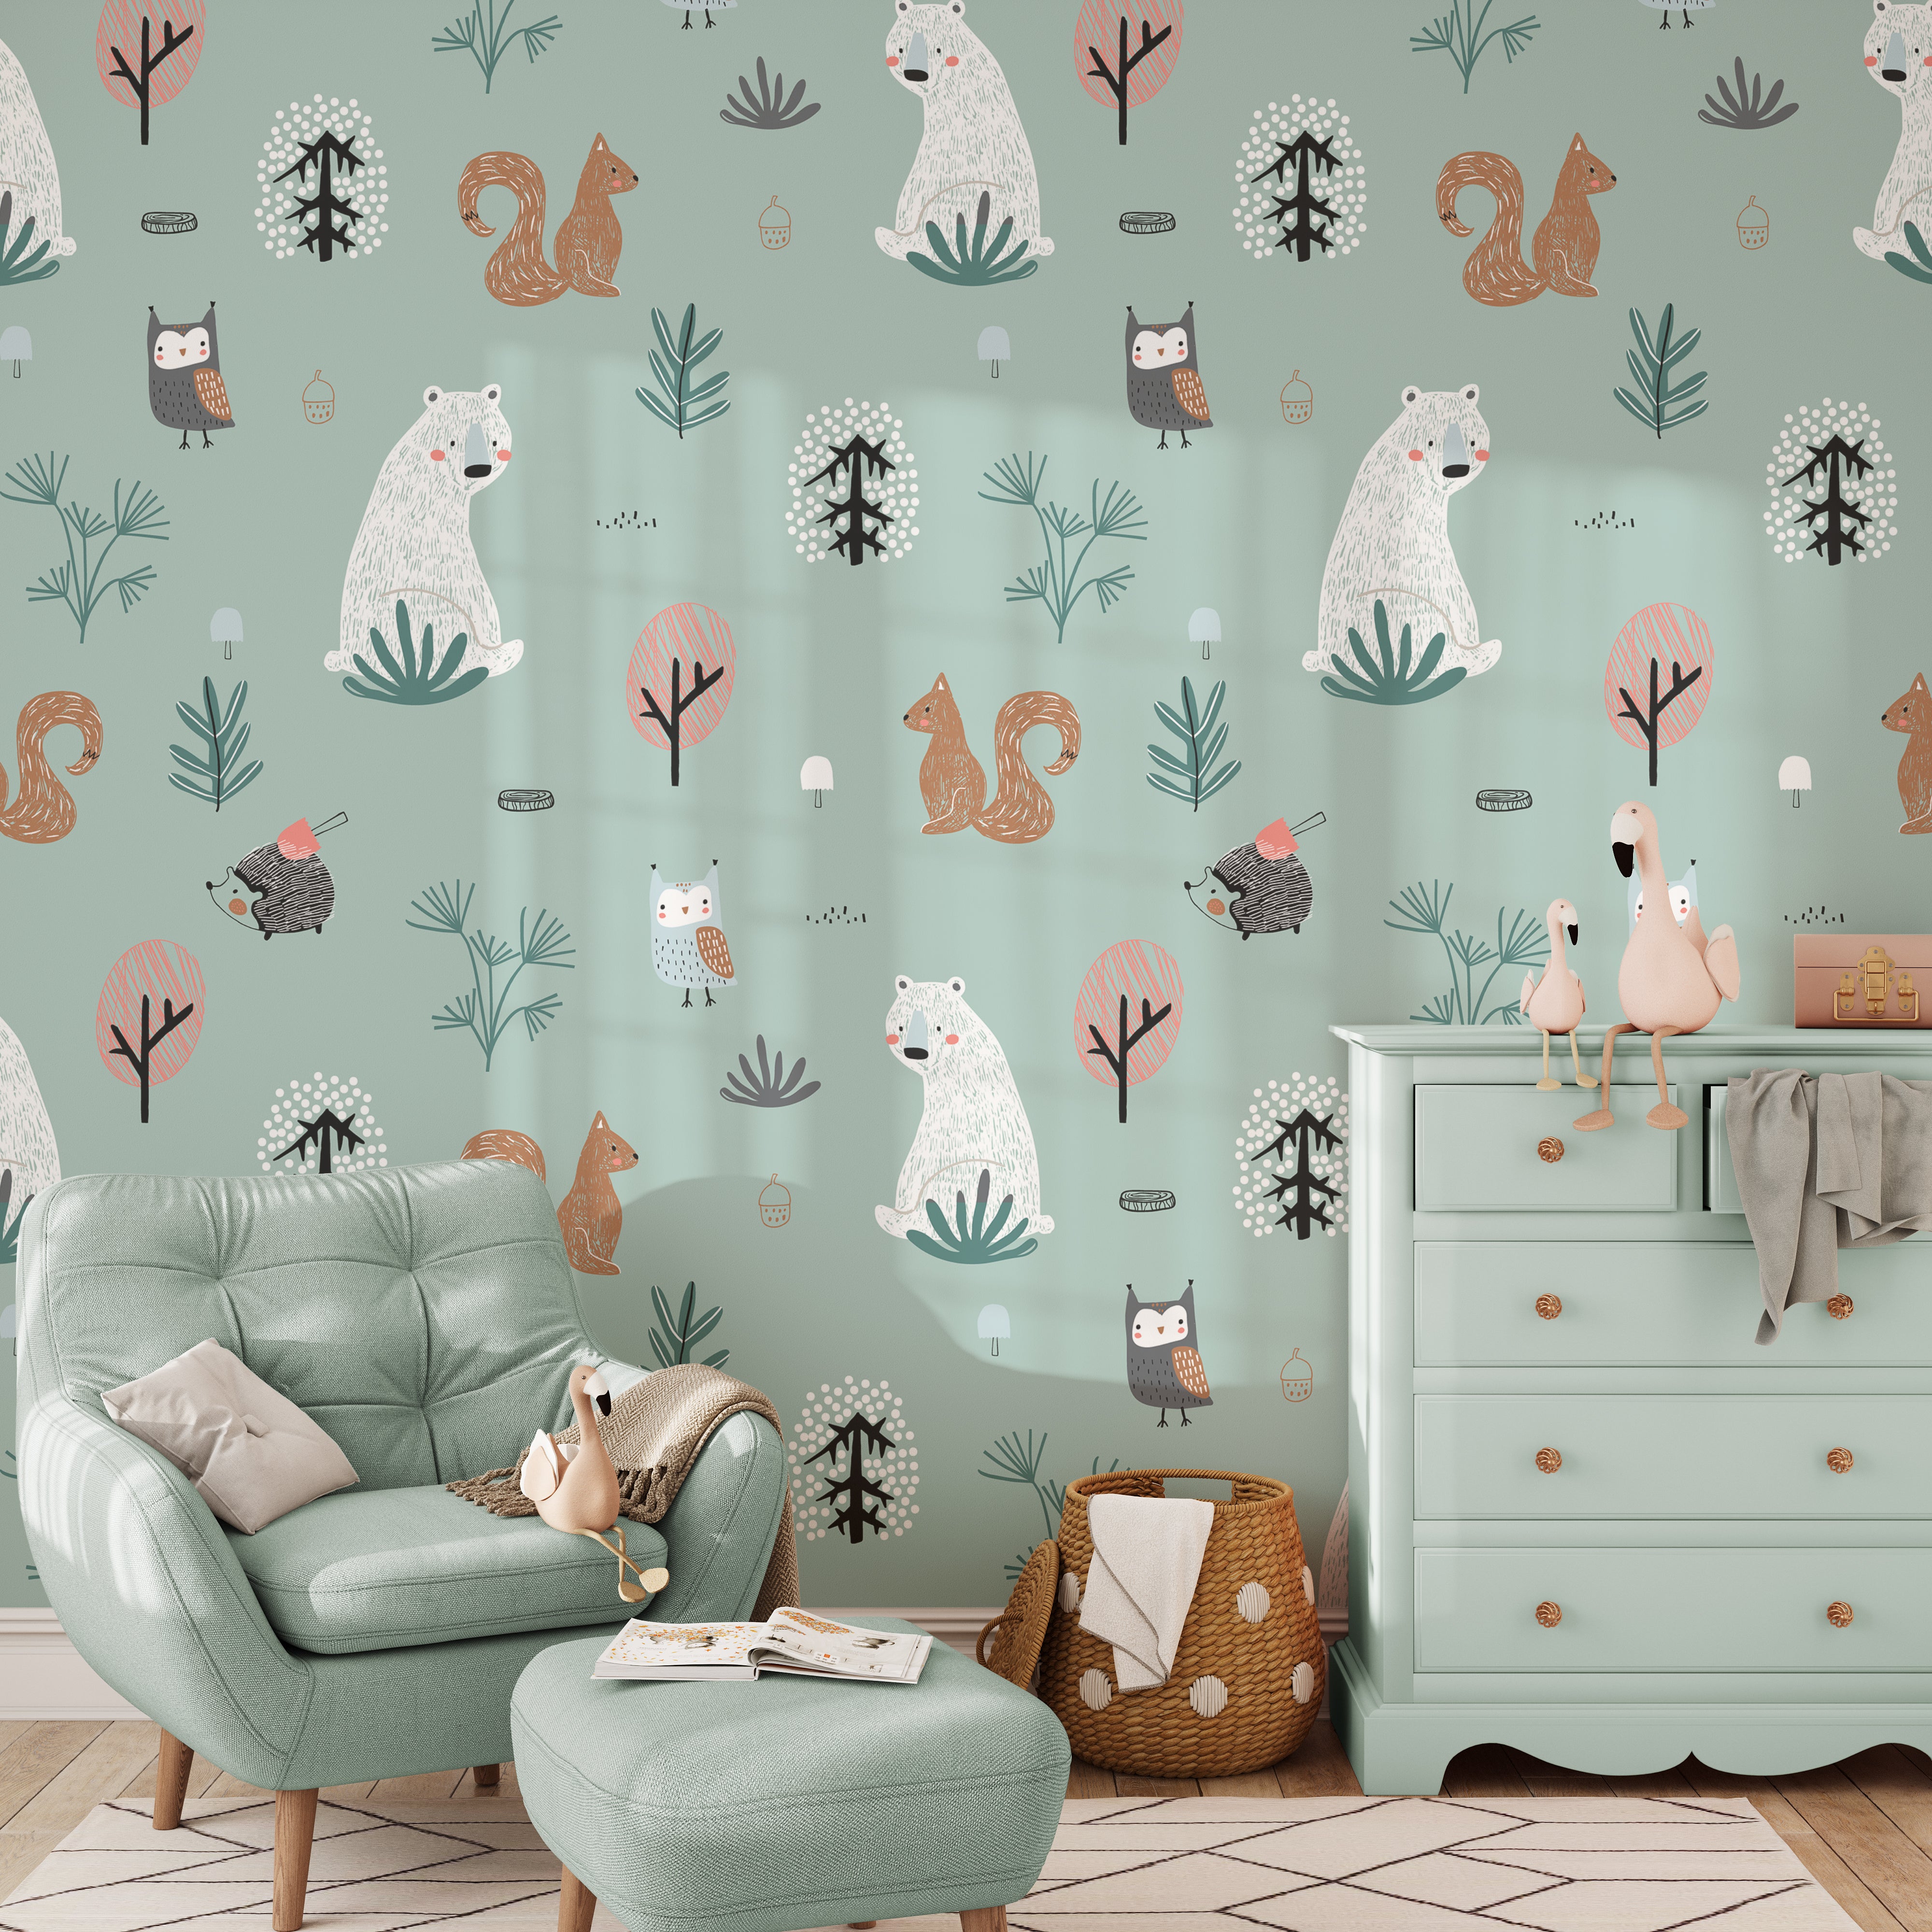 A cozy corner of a living space features the "Kids Wallpaper - Forest Critters - 50 inches." The wallpaper, illustrating a serene forest scene with large critters and flora, complements the modern furnishings, ideal for a reading nook or a child’s play area.